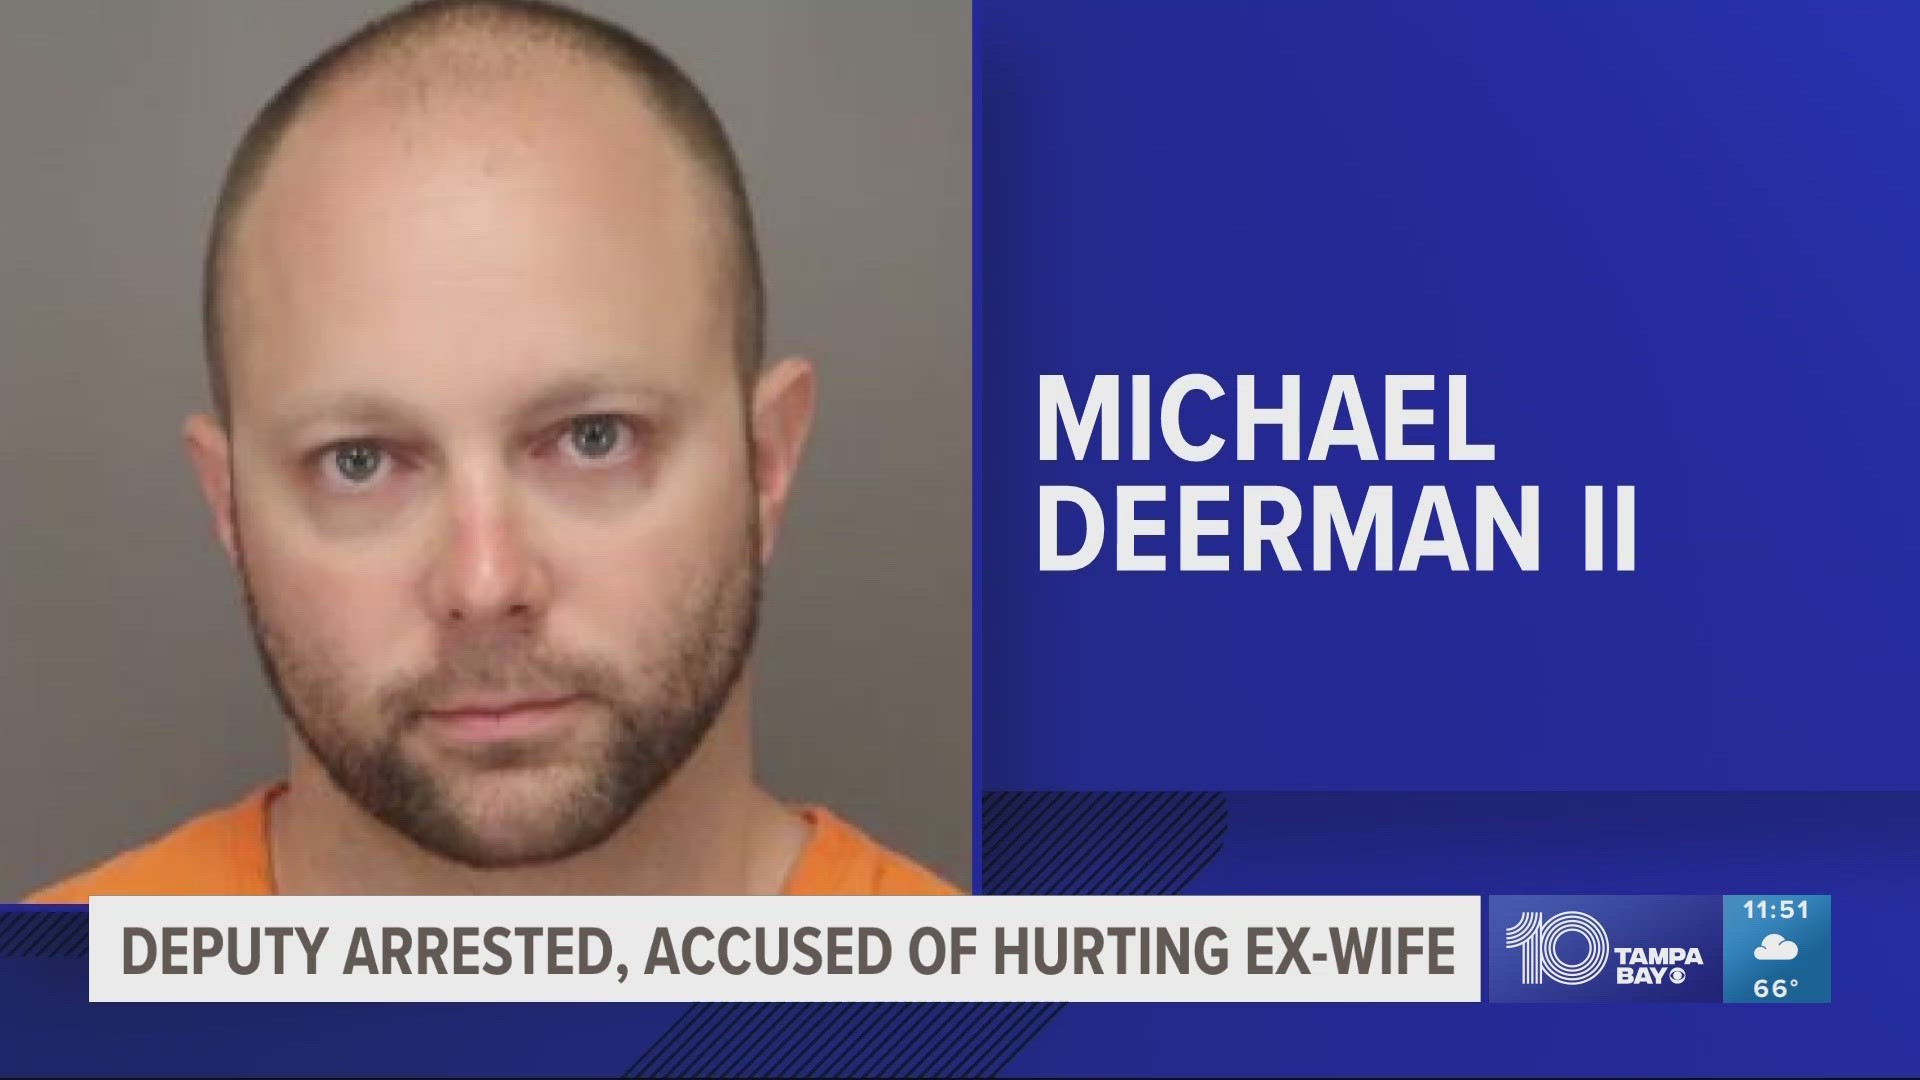 The sheriff's office said around 9:35 p.m. Corporal Michael Deerman II, 35, went to his ex-wife's home in Seminole and entered after being told not to.